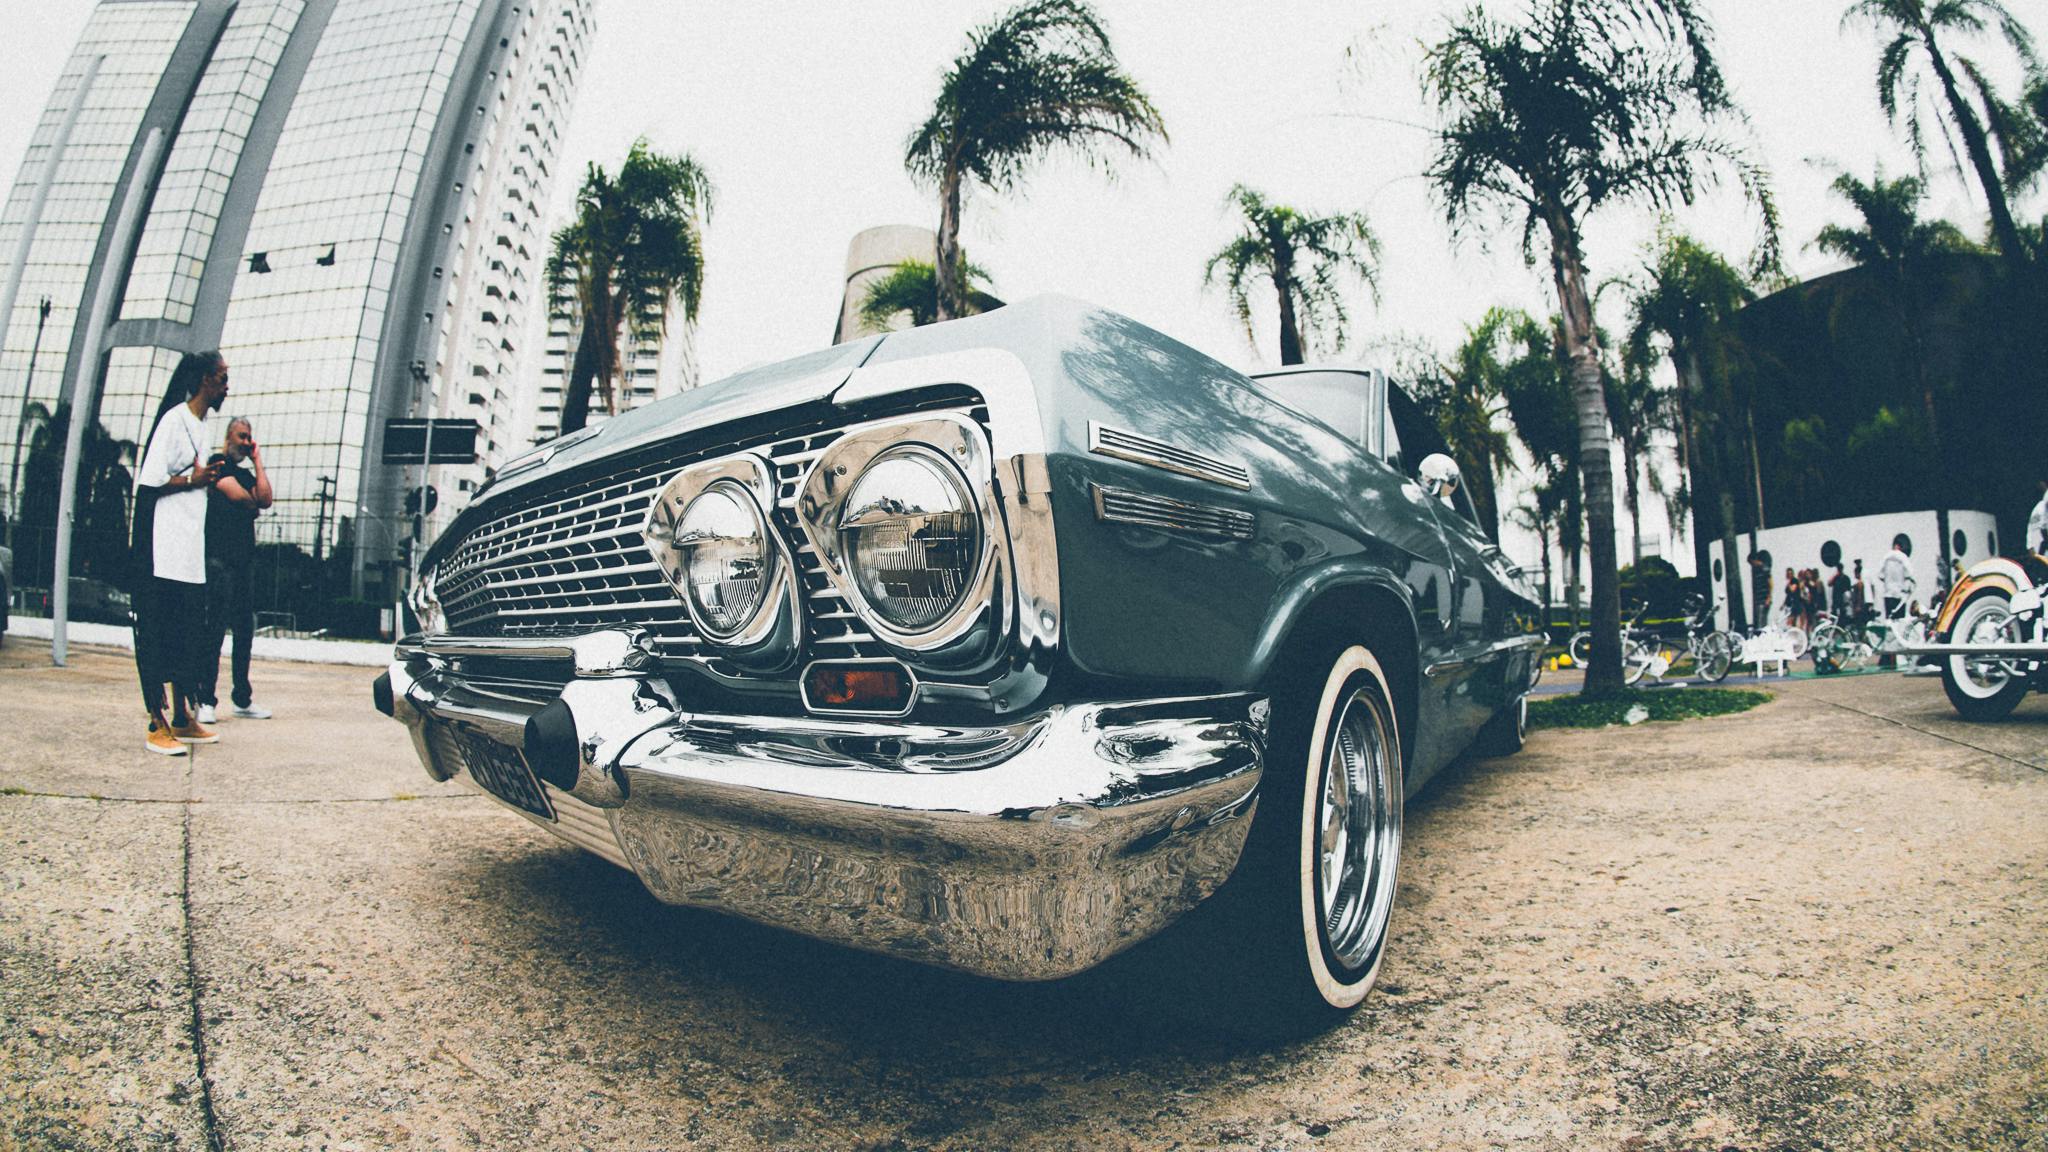 lowrider car wallpaper by onemicGfx on DeviantArt